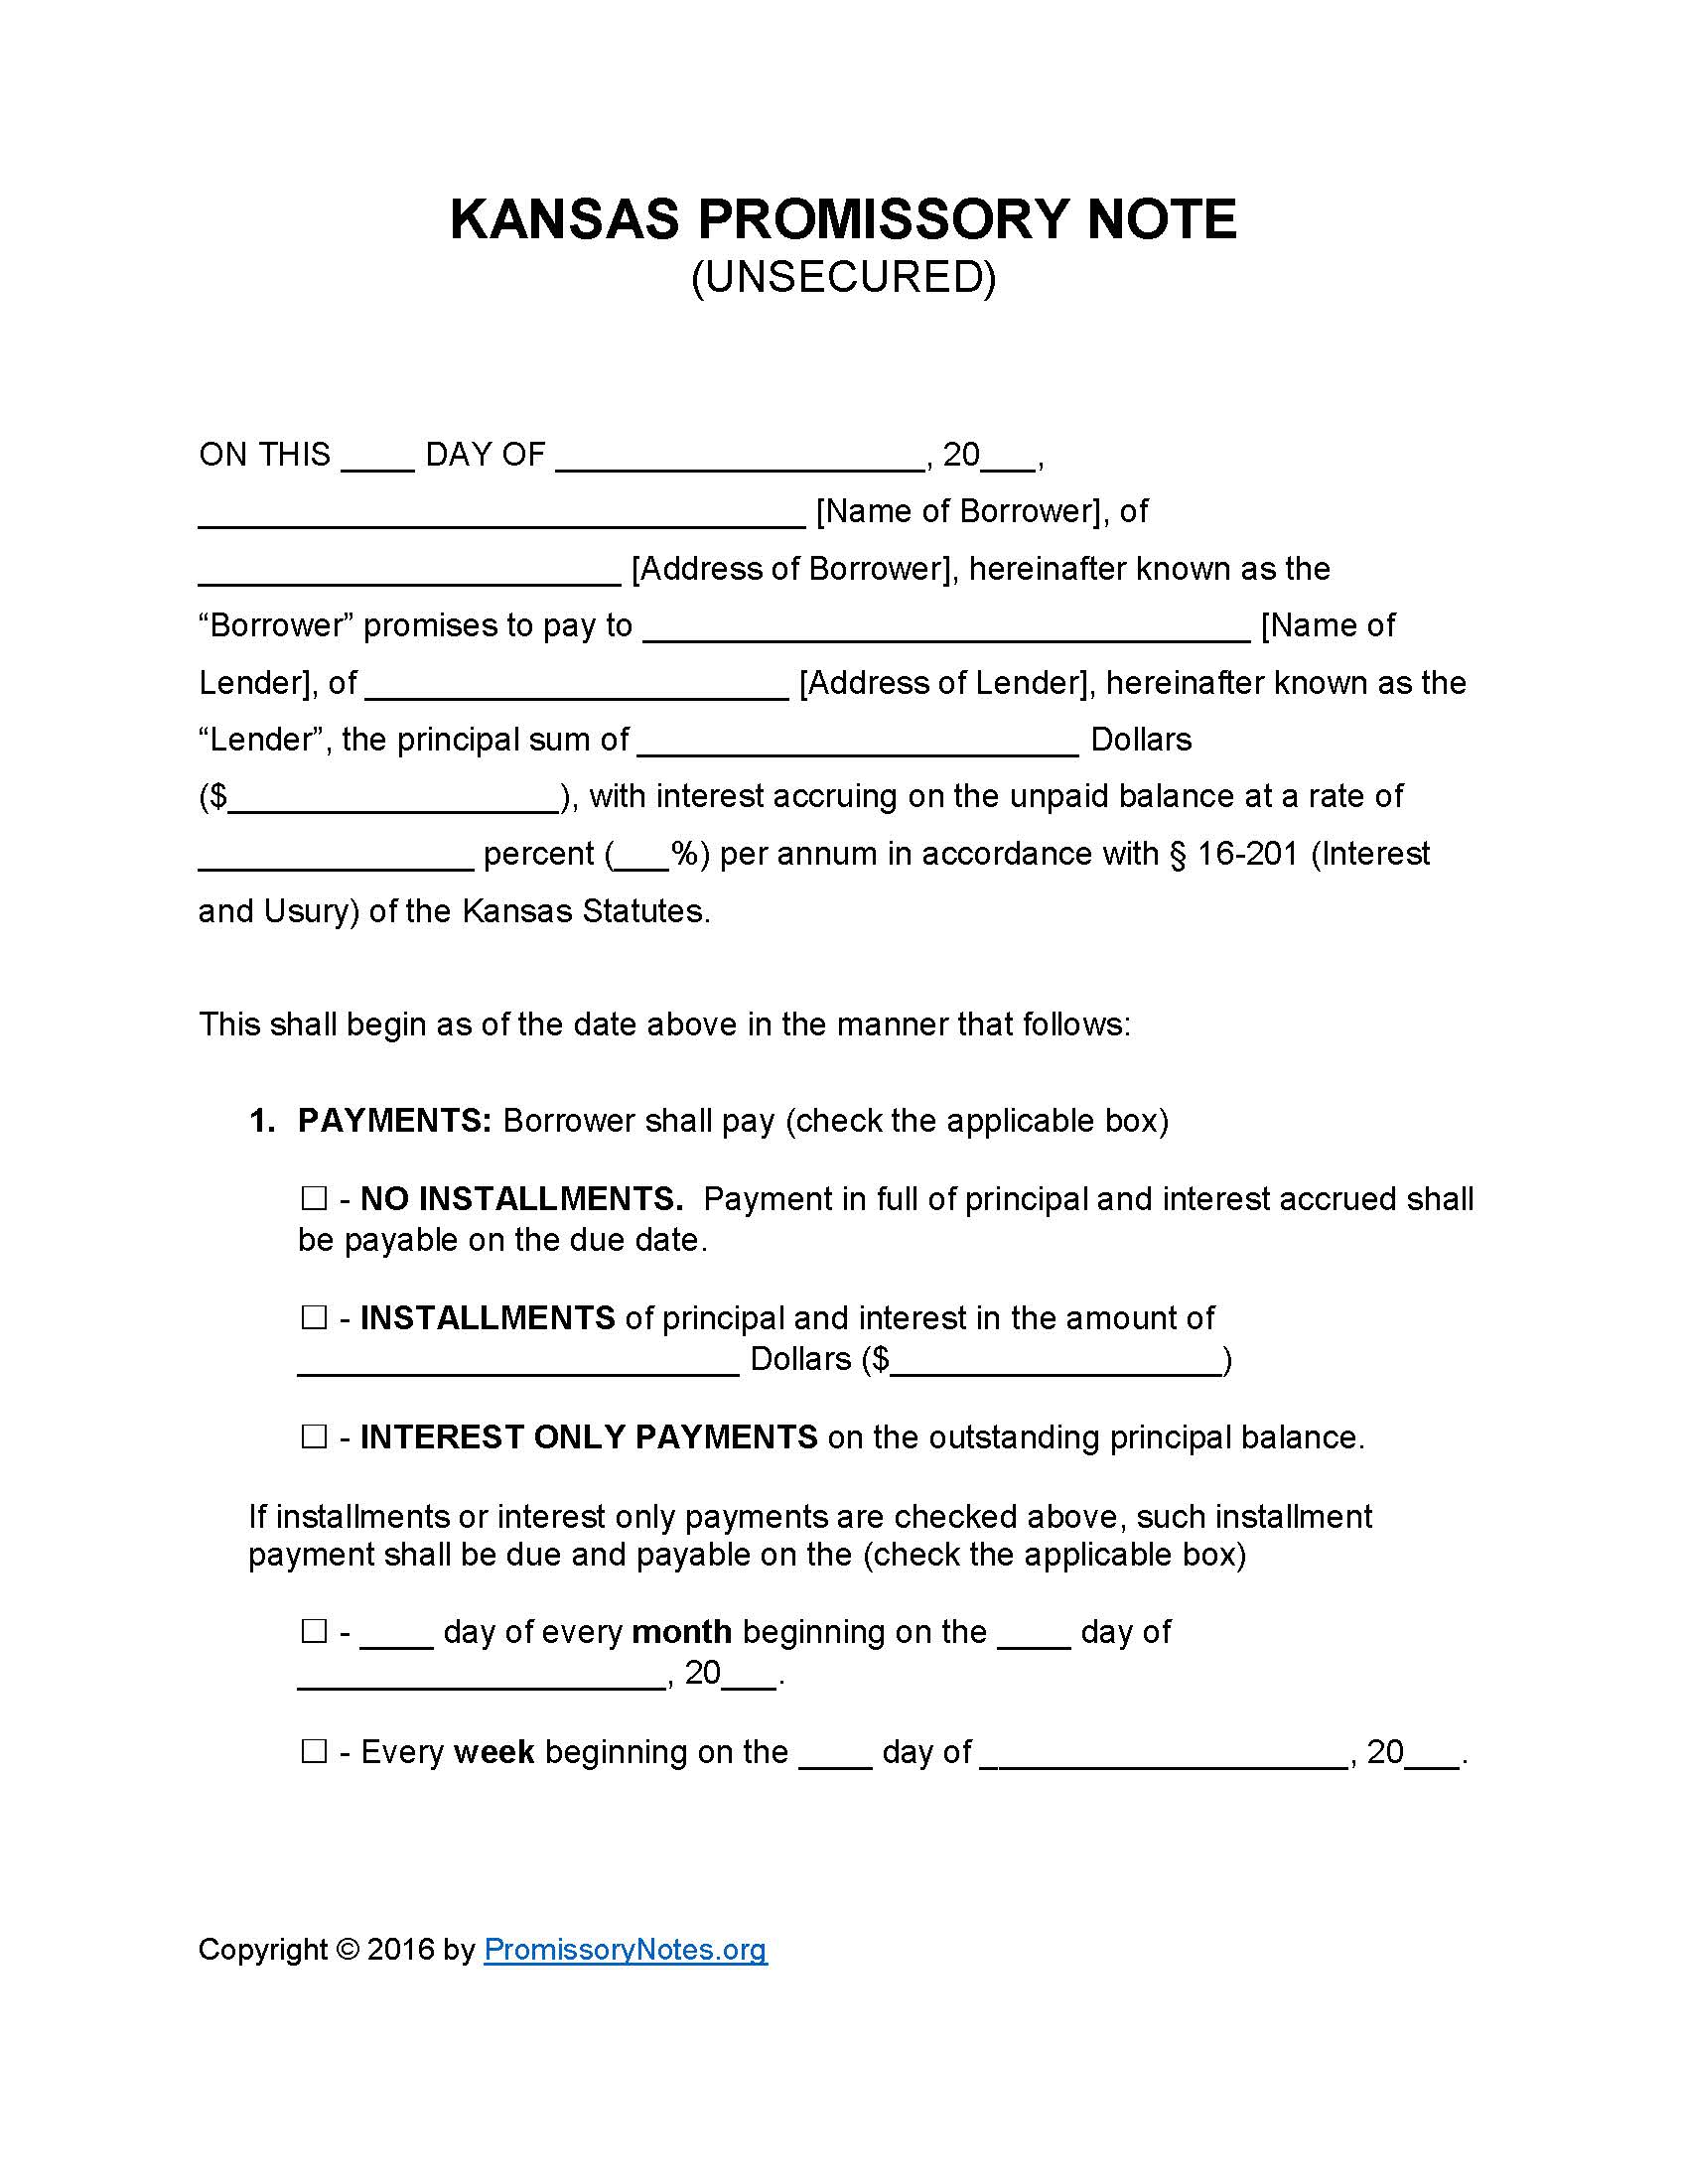 kansas-unsecured-promissory-note-form